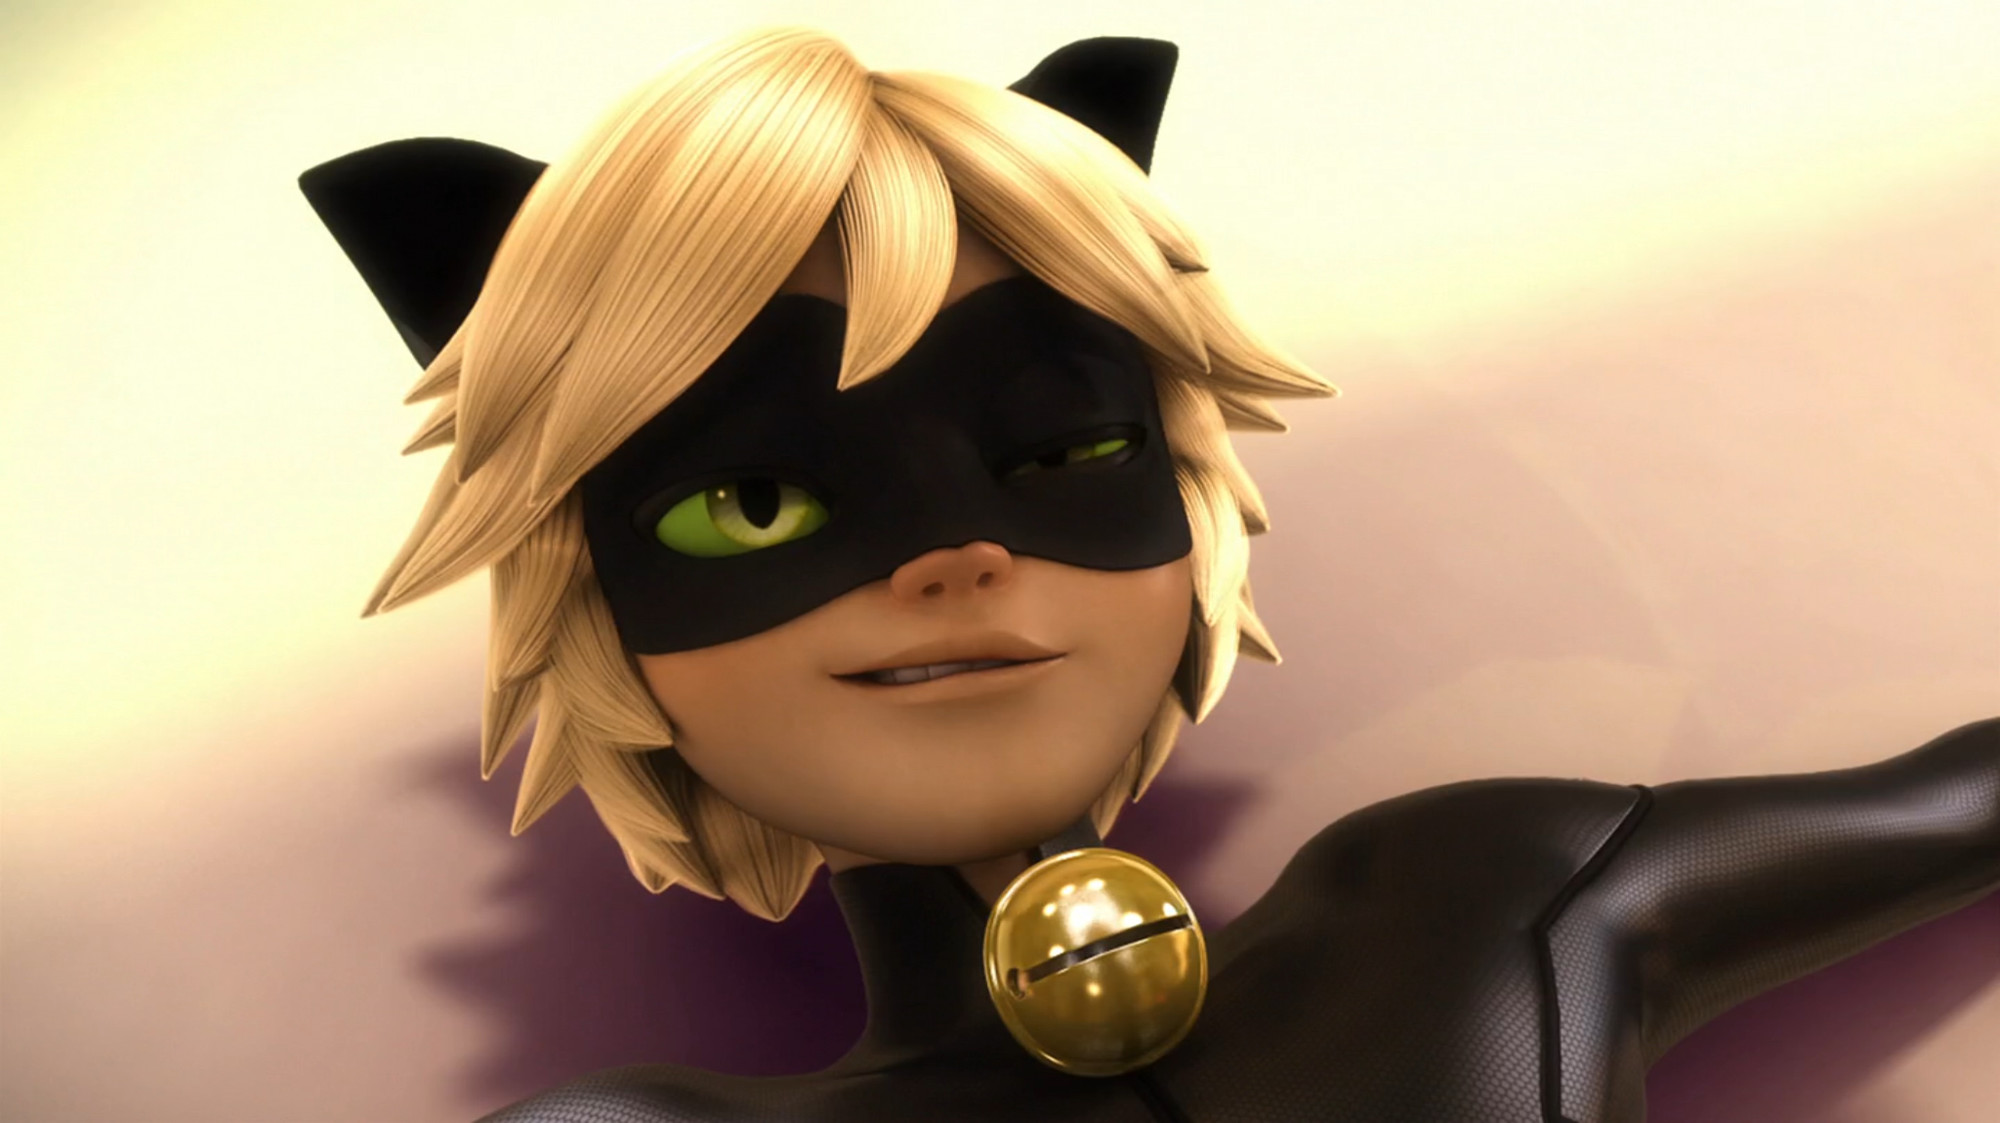 2000x1123 Miraculous Ladybug Chat Noir or Cat Noir? Which do you like more?